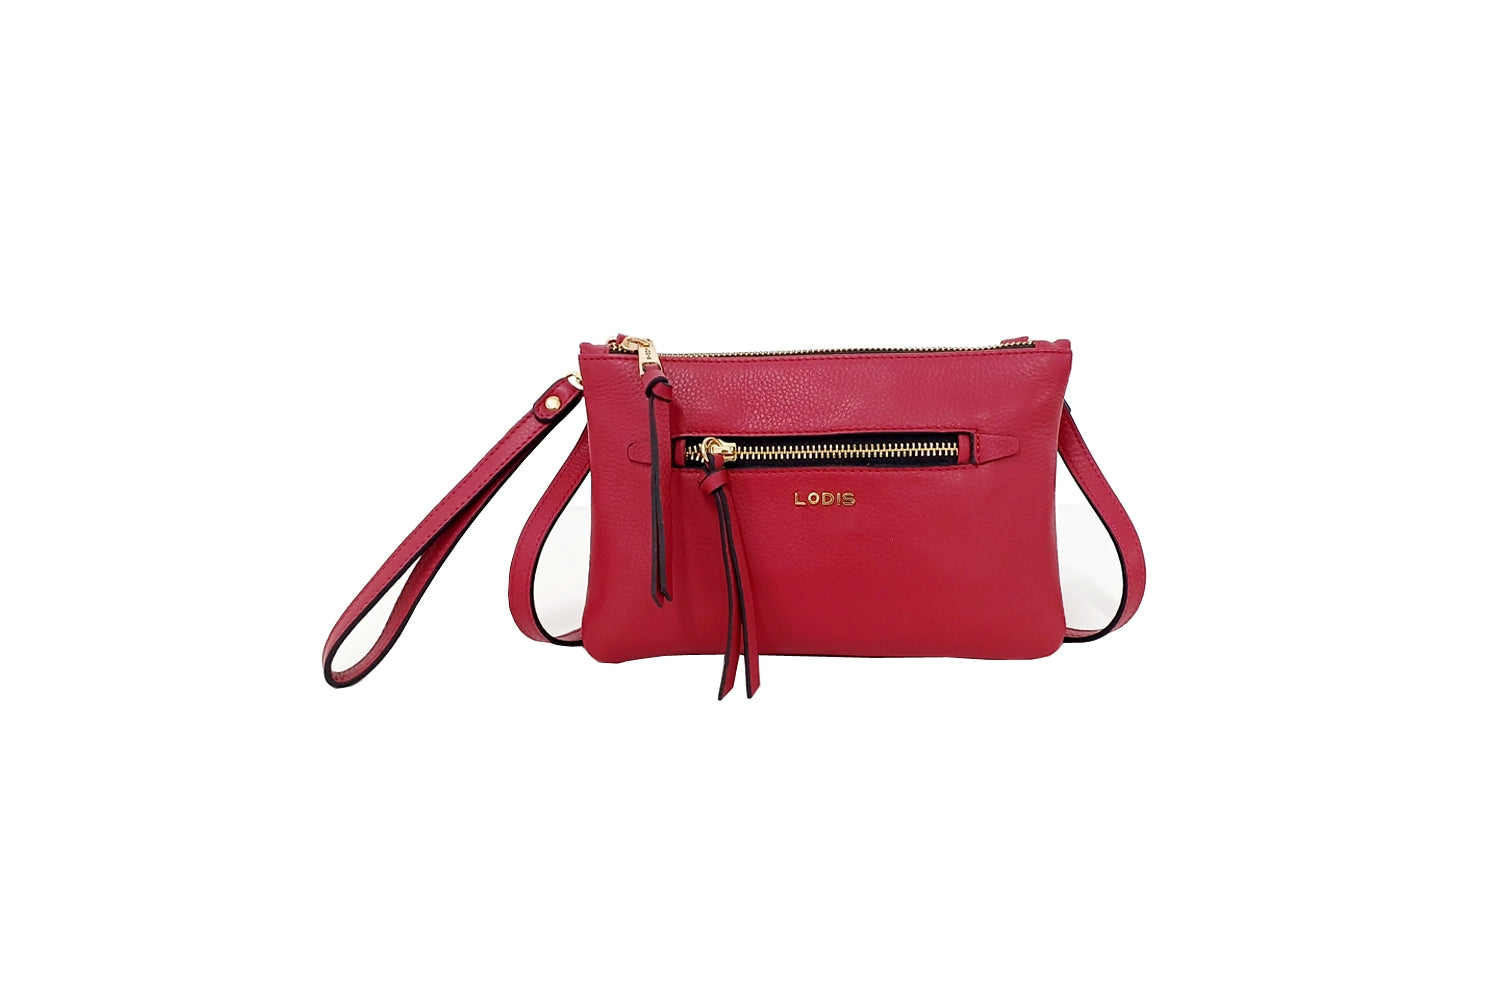 Get  Exclusive ELLIE SLING With 100% Genuine Leather At Lodis